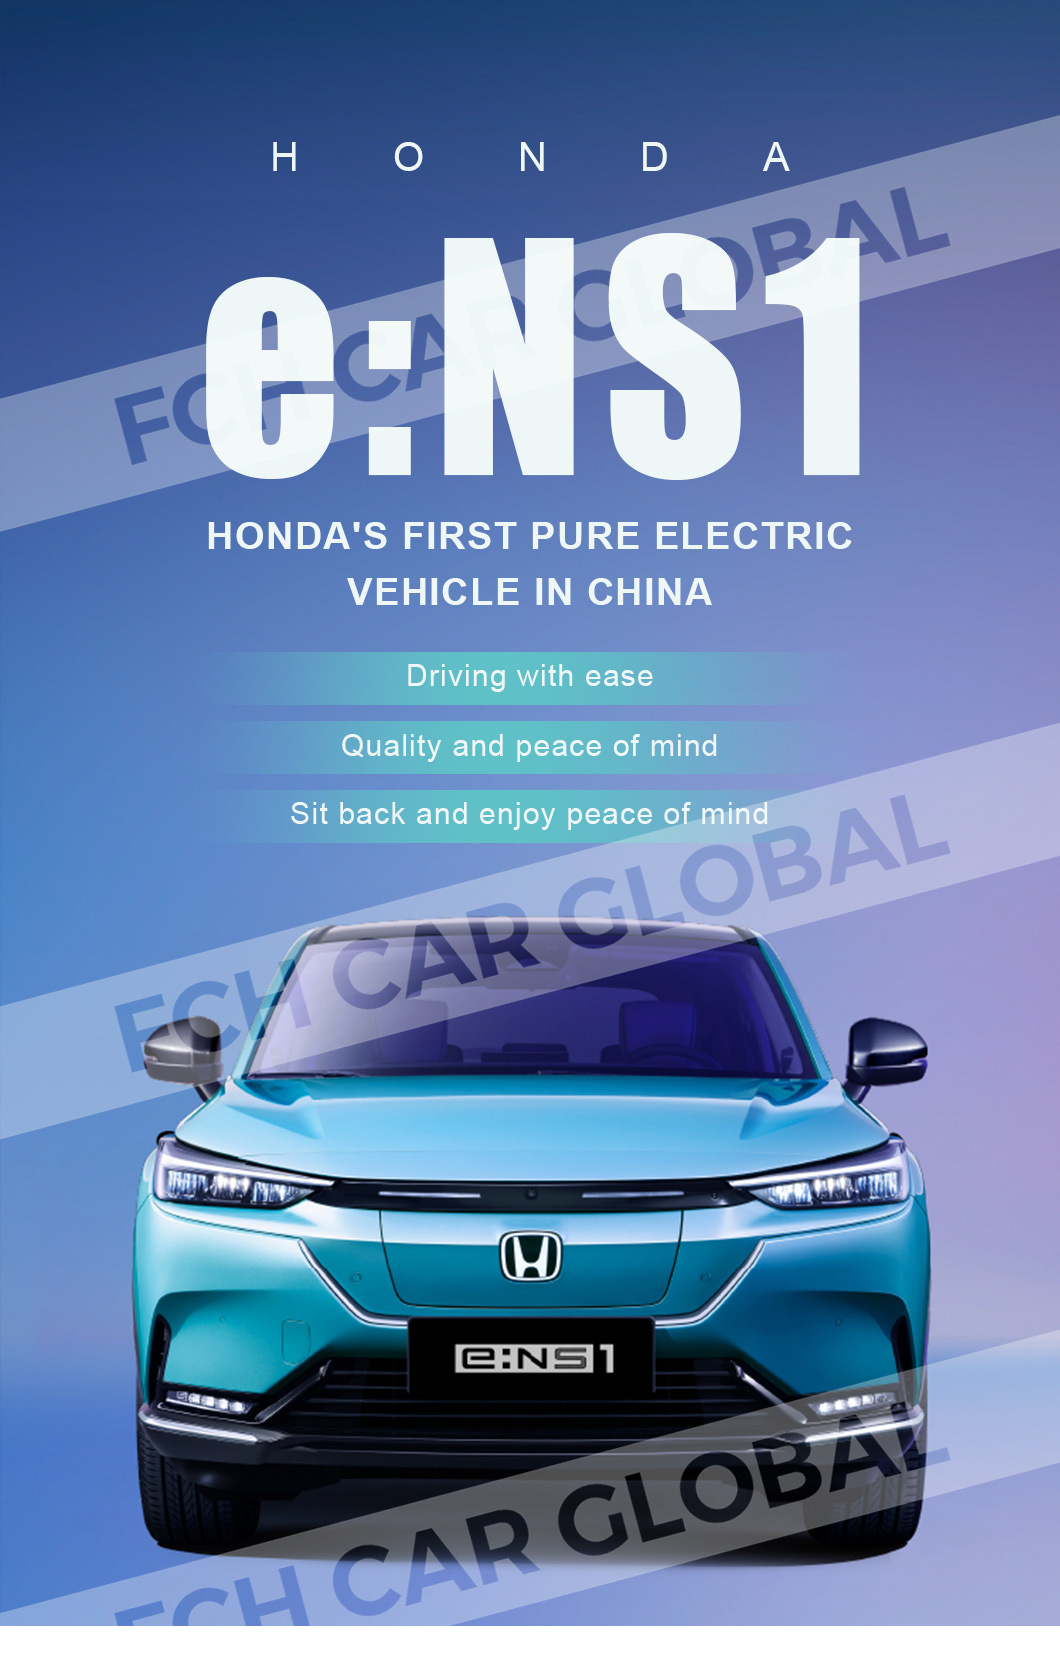 Honda Ens1 510km Long Range High Speed New Energy Best Electric SUV EV Cars on Sale in China Used Vehicle